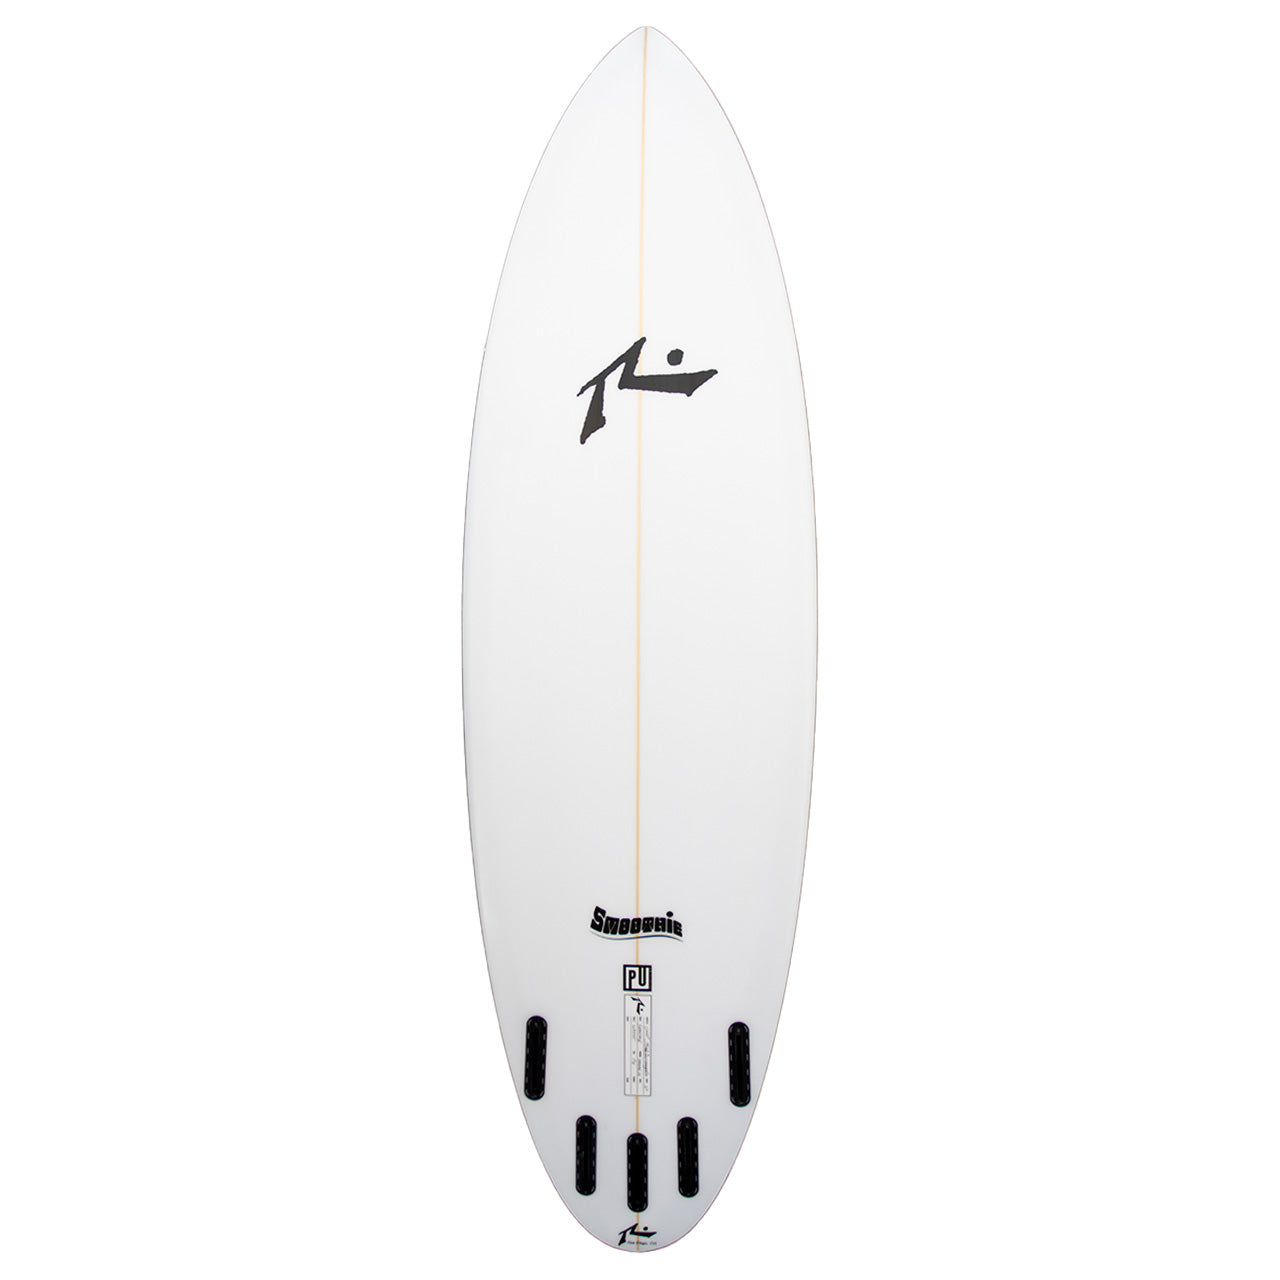 Smoothie Surfboard - In Stock - Deck View - Rusty Surfboards